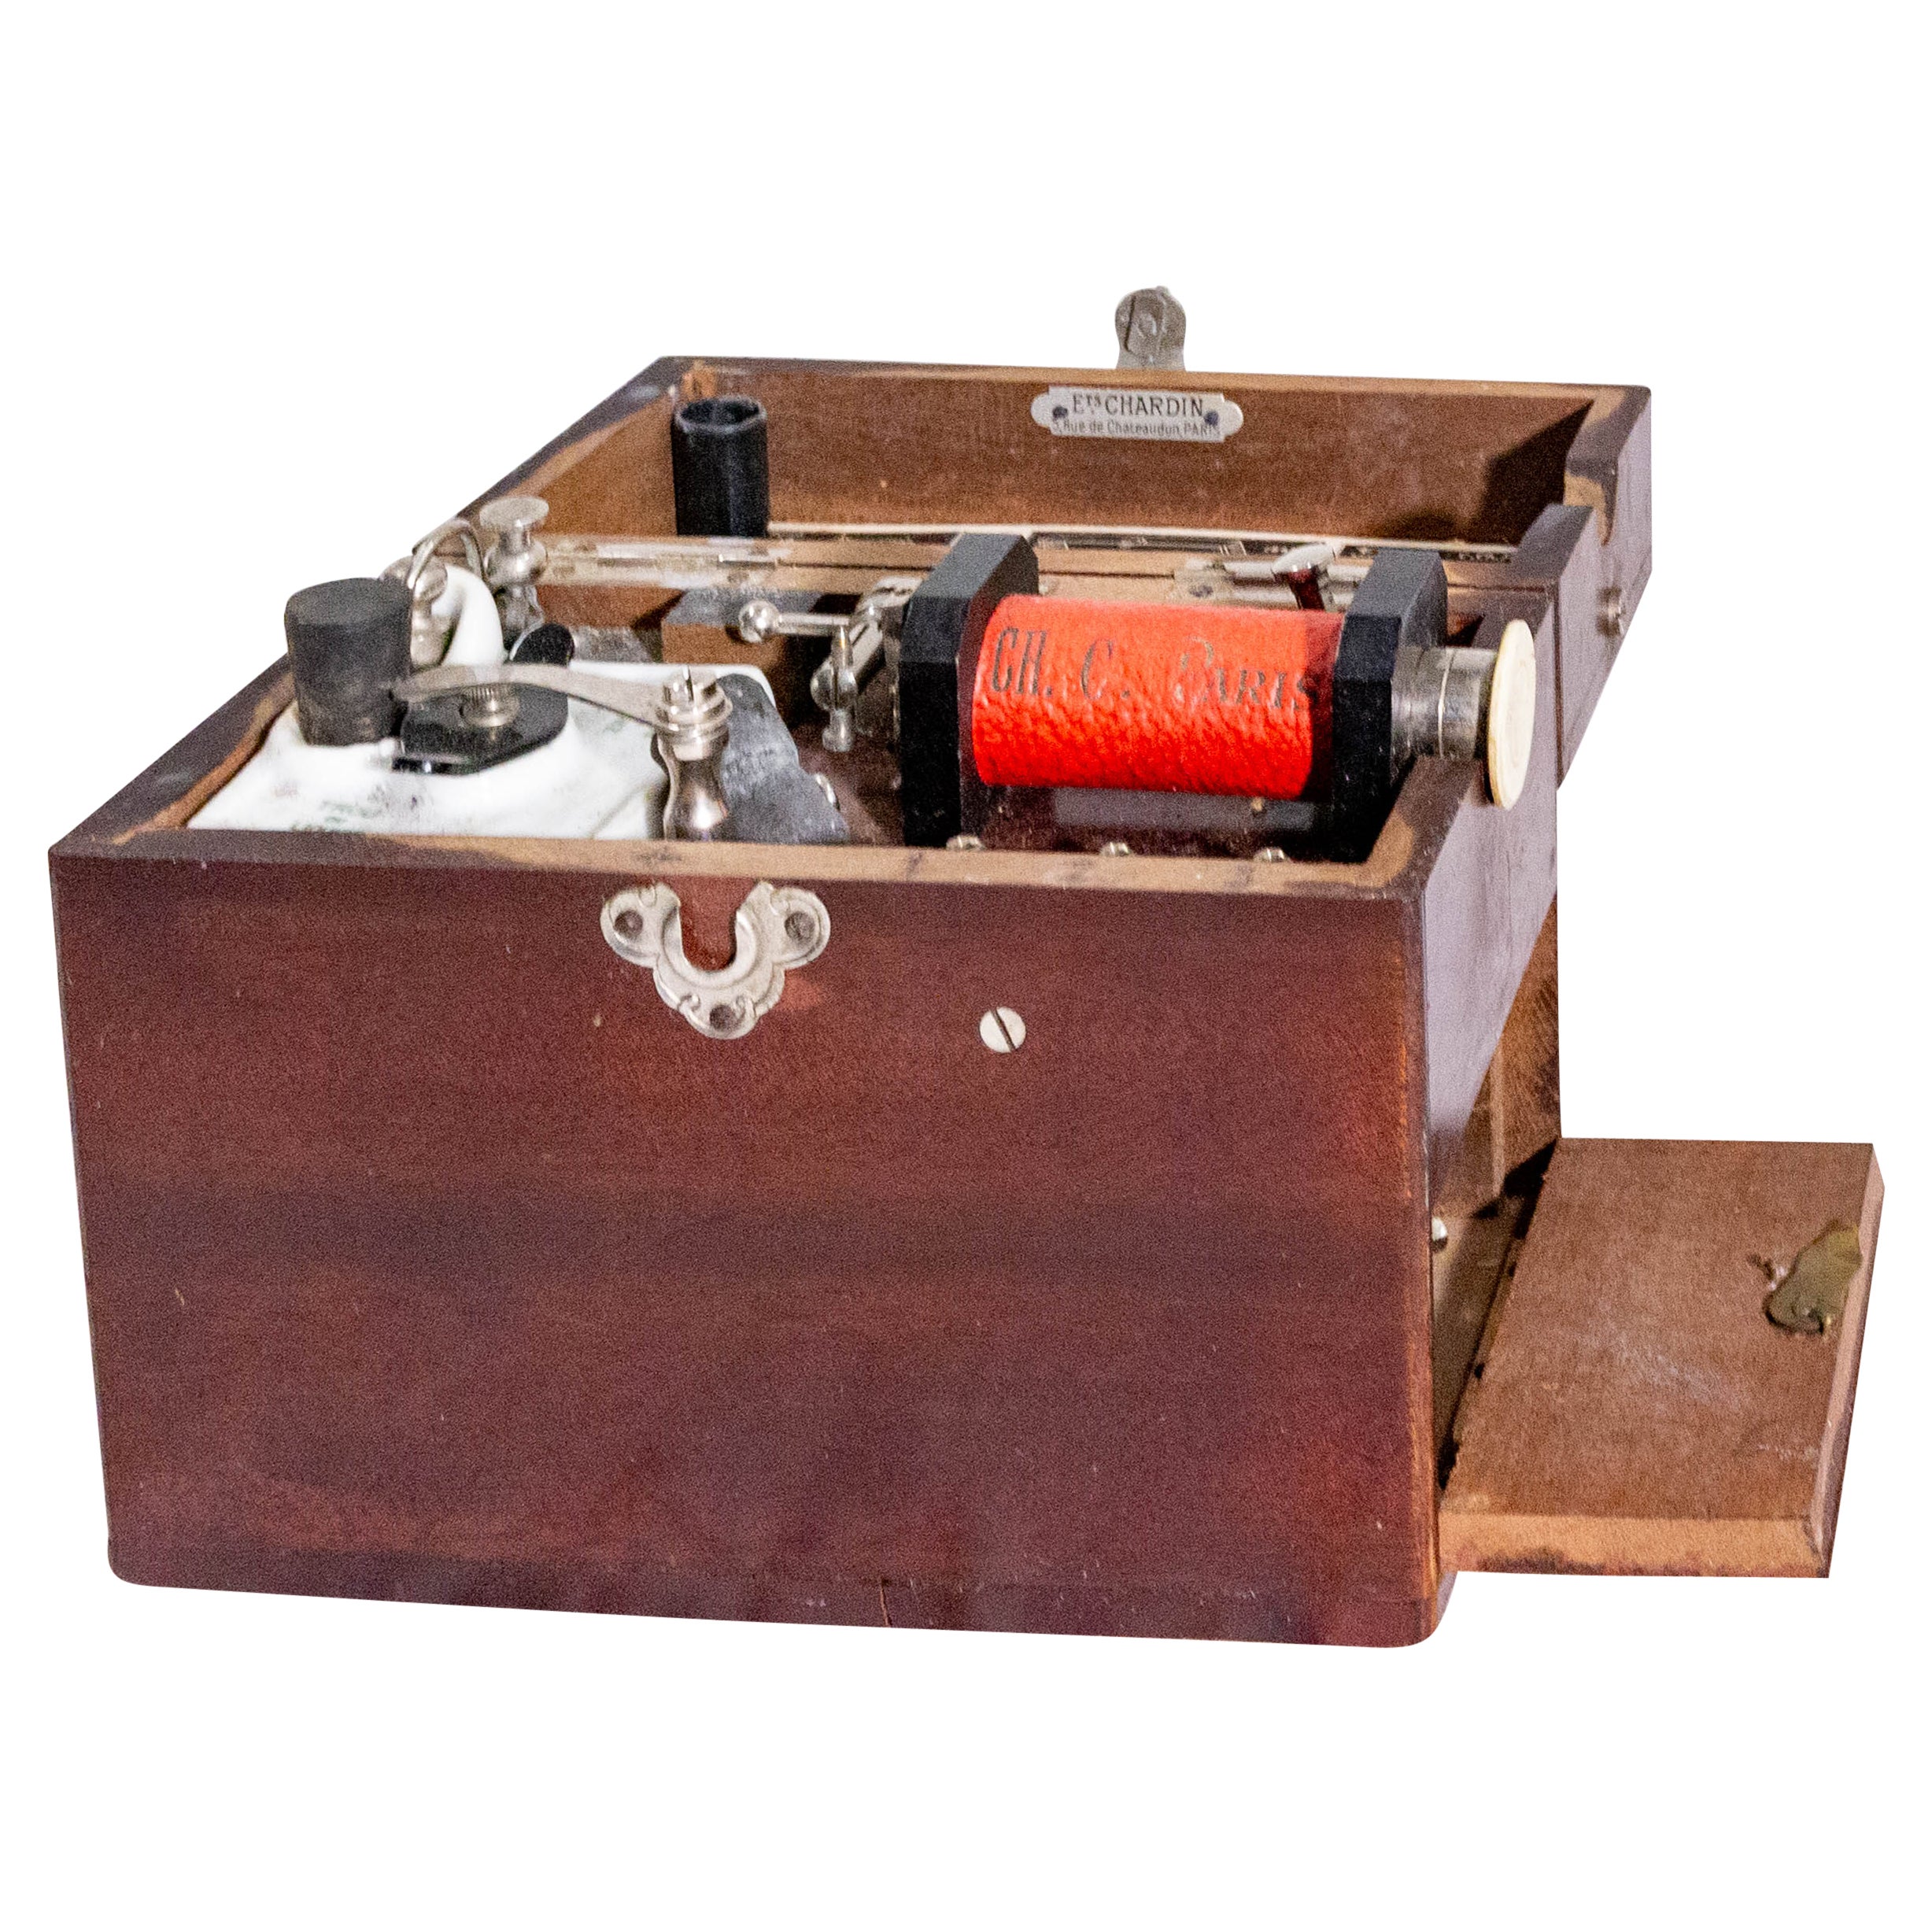 Antique Electromedical Device from Chardin in Wooden Case, France, circa 1910 For Sale